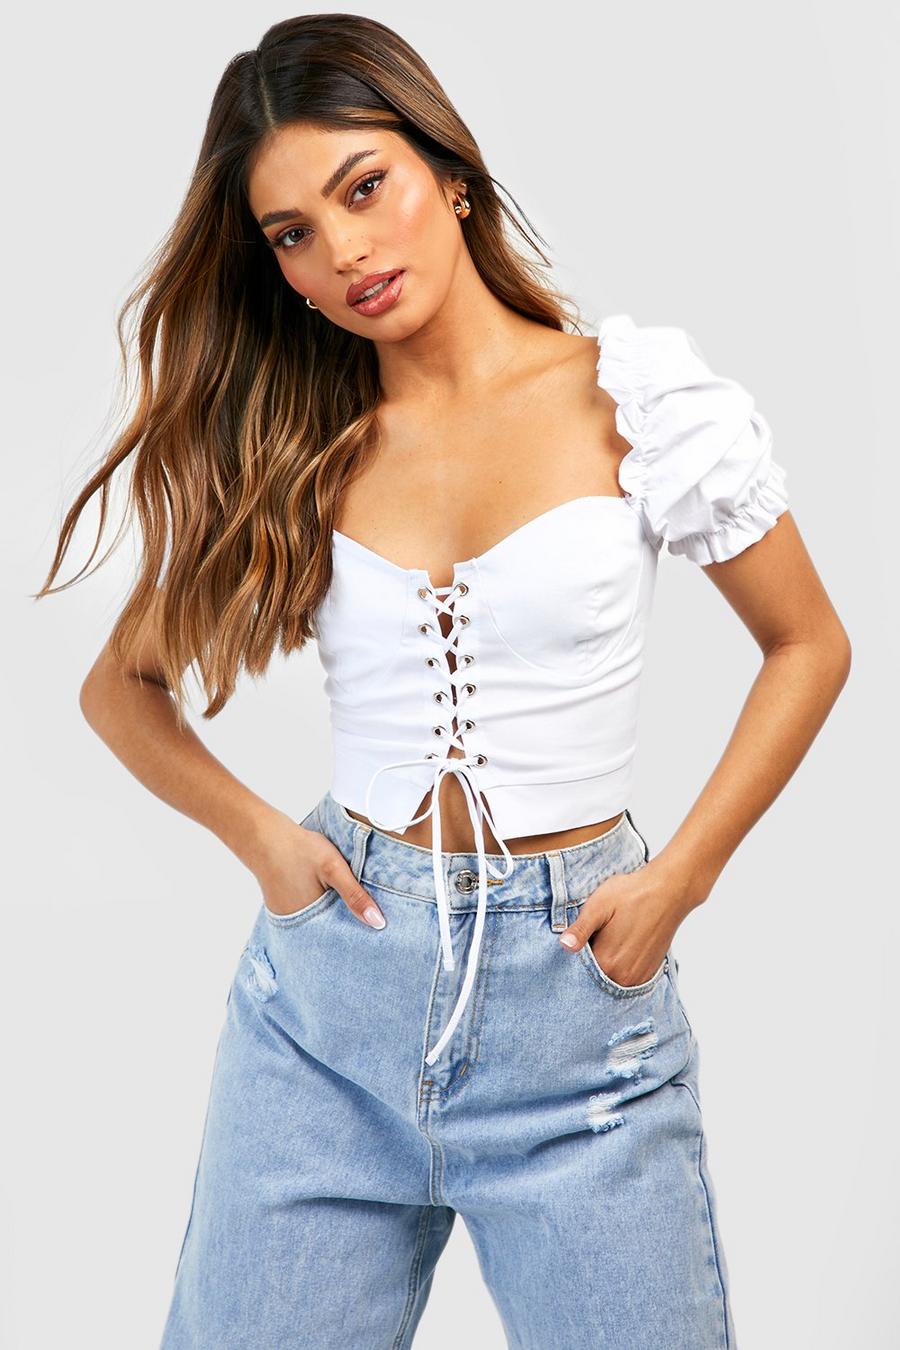 Urban Outfitters Bengaline Corset Top - White XL at - ShopStyle